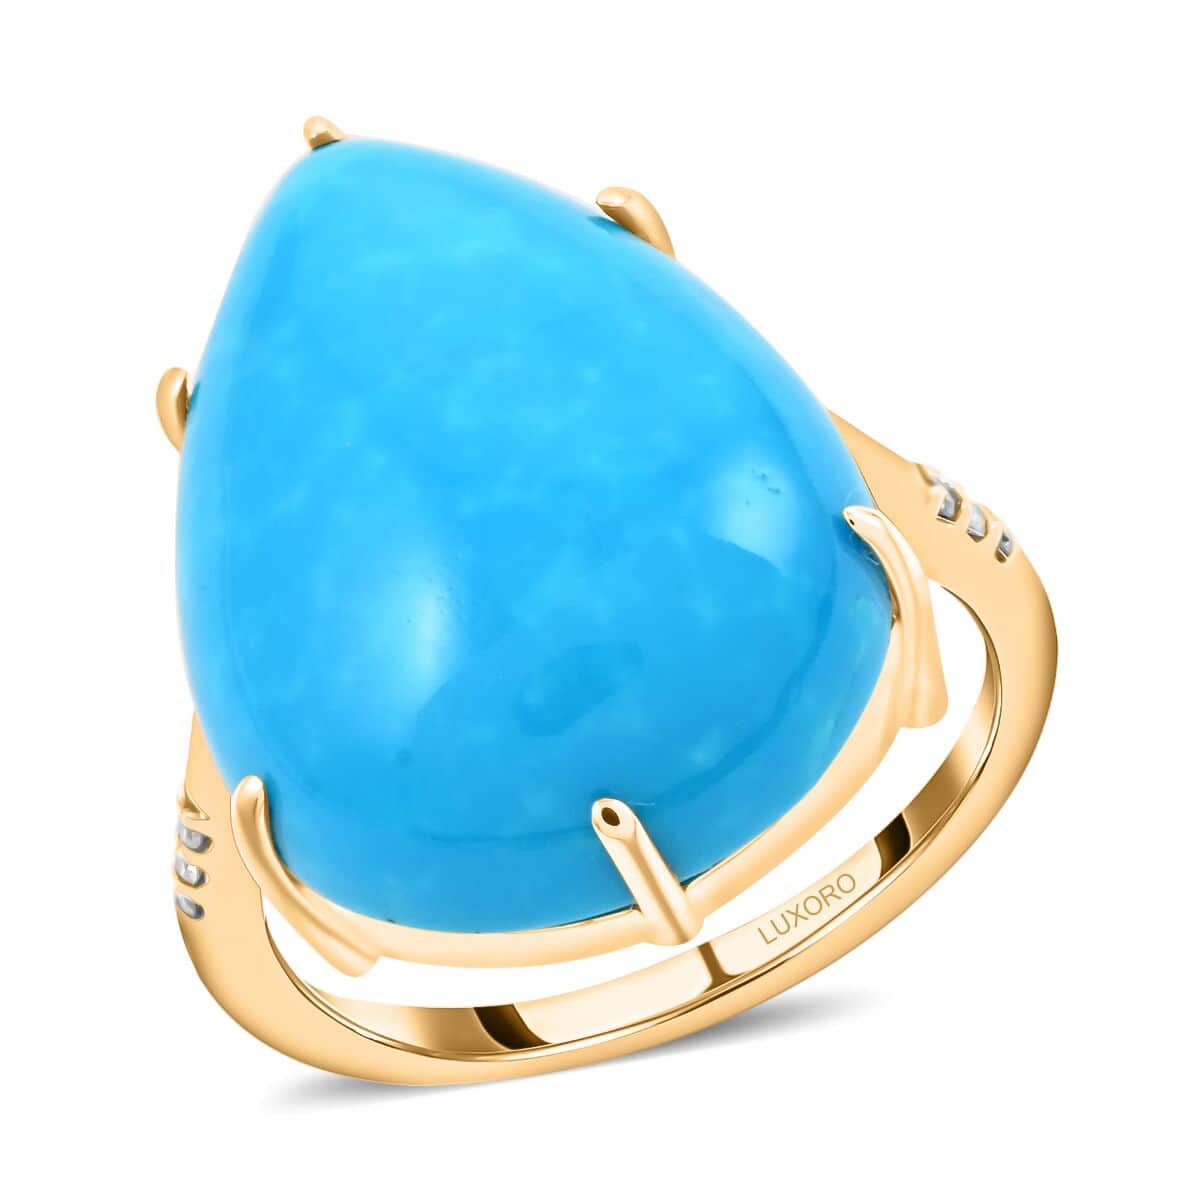 Certified & Appraised Luxoro 10K Yellow Gold AAA Sleeping Beauty Turquoise and I2 Diamond Ring 12.65 ctw (Del. in 7-10 Days) image number 0